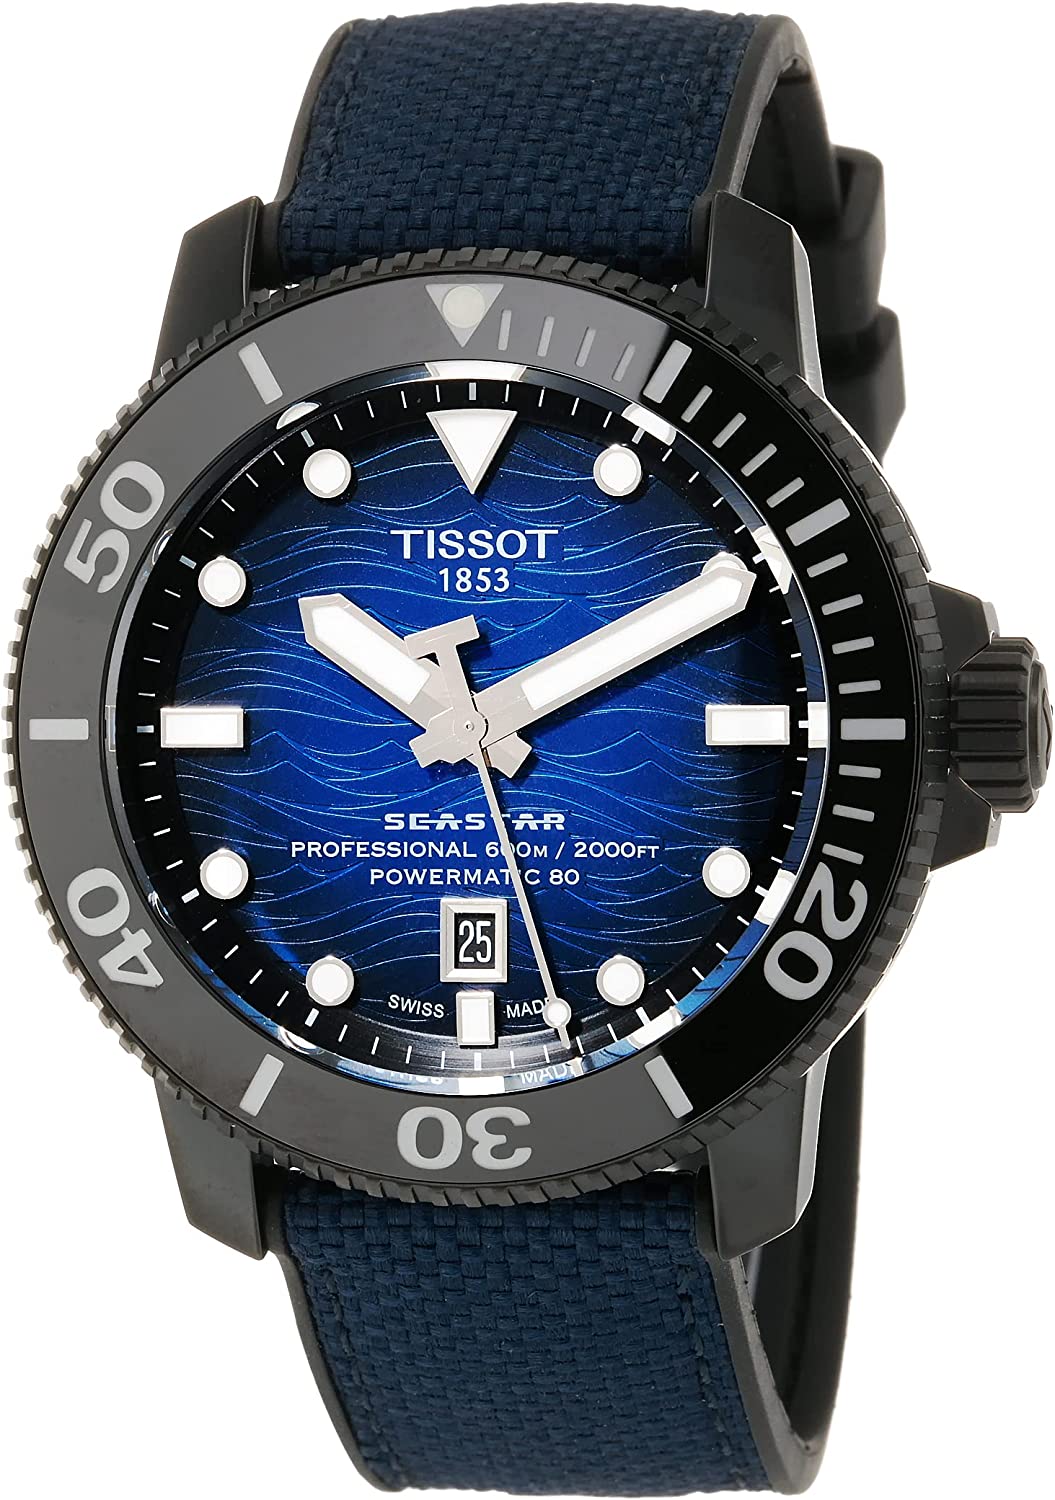 Tissot Mens Tissot Seastar 2000 Professional Powermatic 80 316L Stainless Steel case with Black PVD Coating Automatic Watch, Blue/Black, Rubber, 22 (T1206073704100)